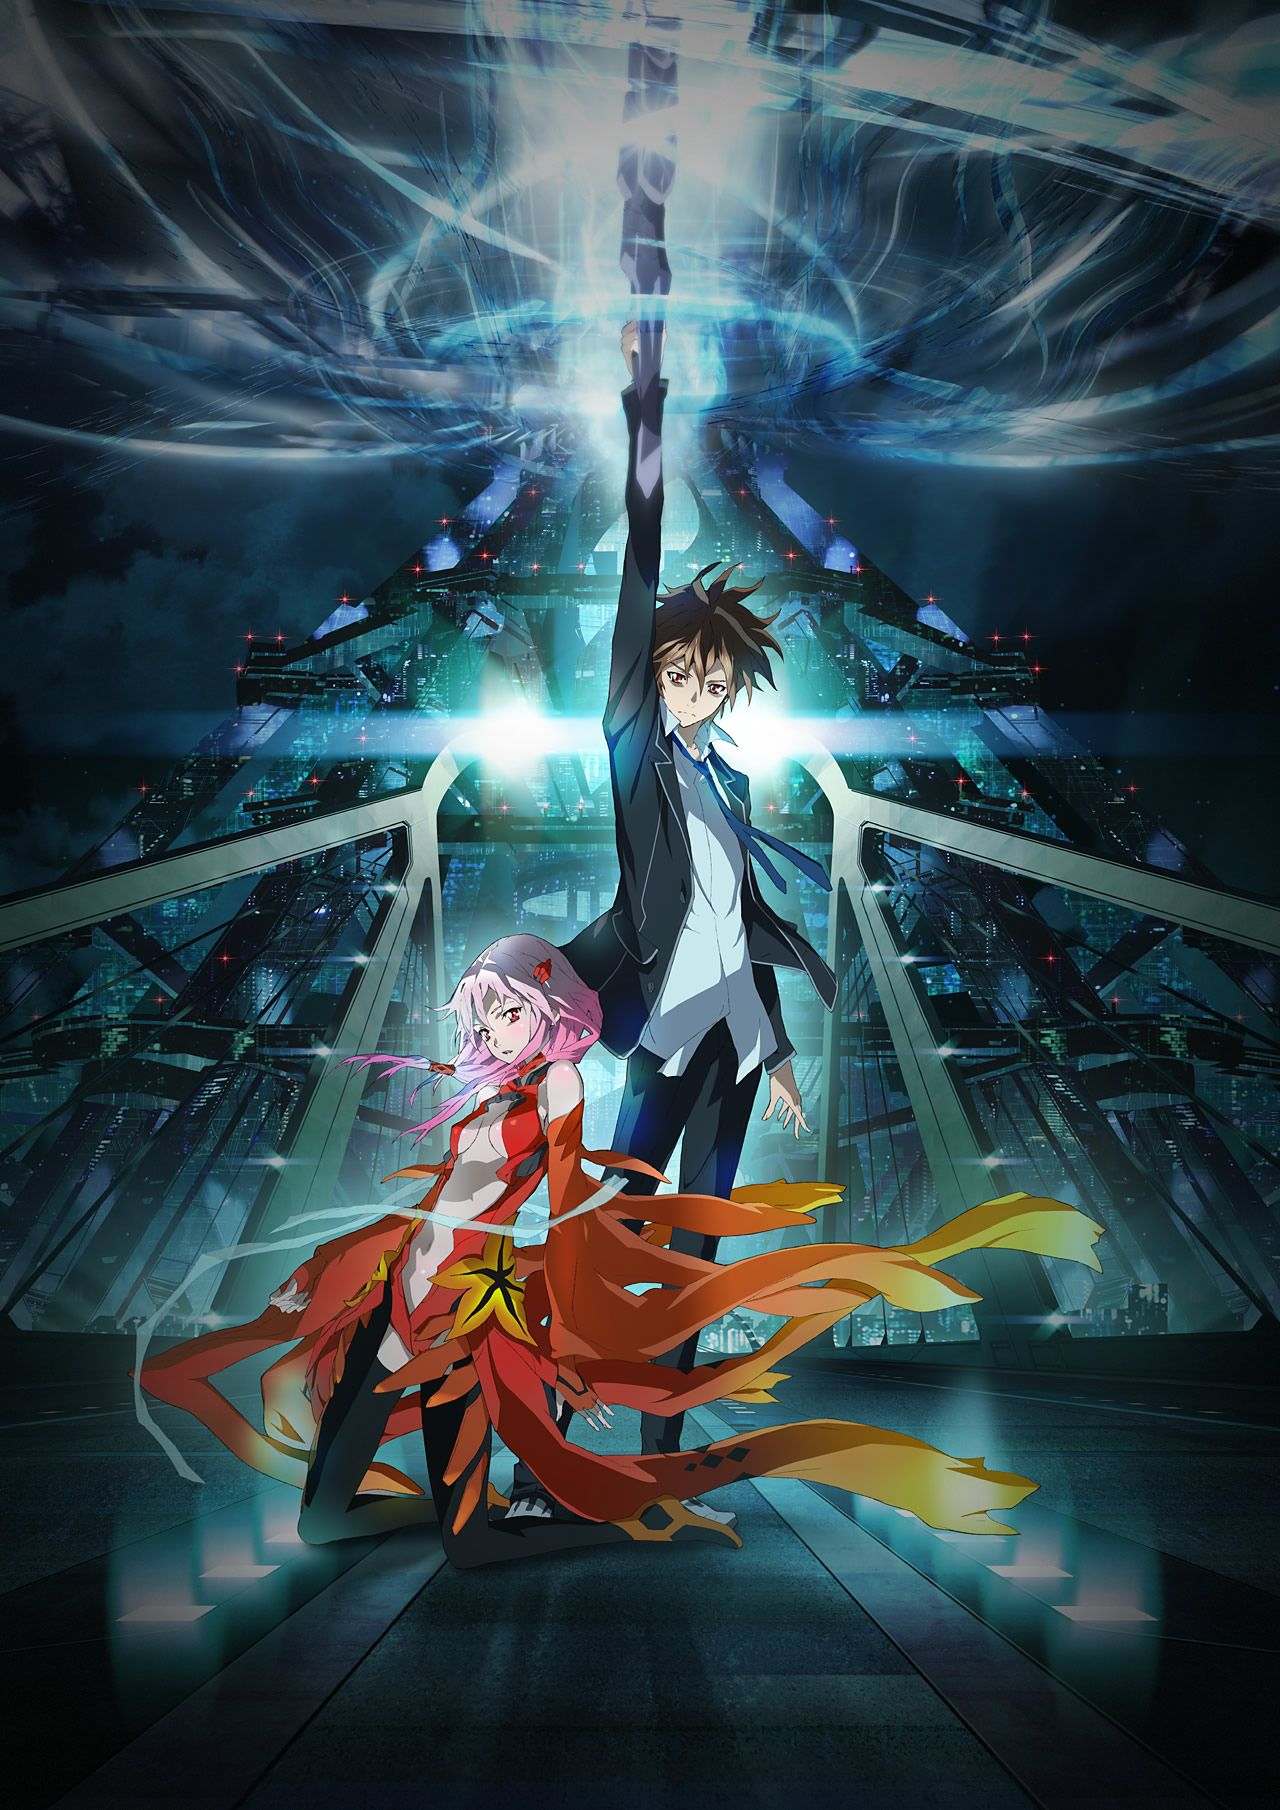 Guilty Crown: The Fast Food of Anime